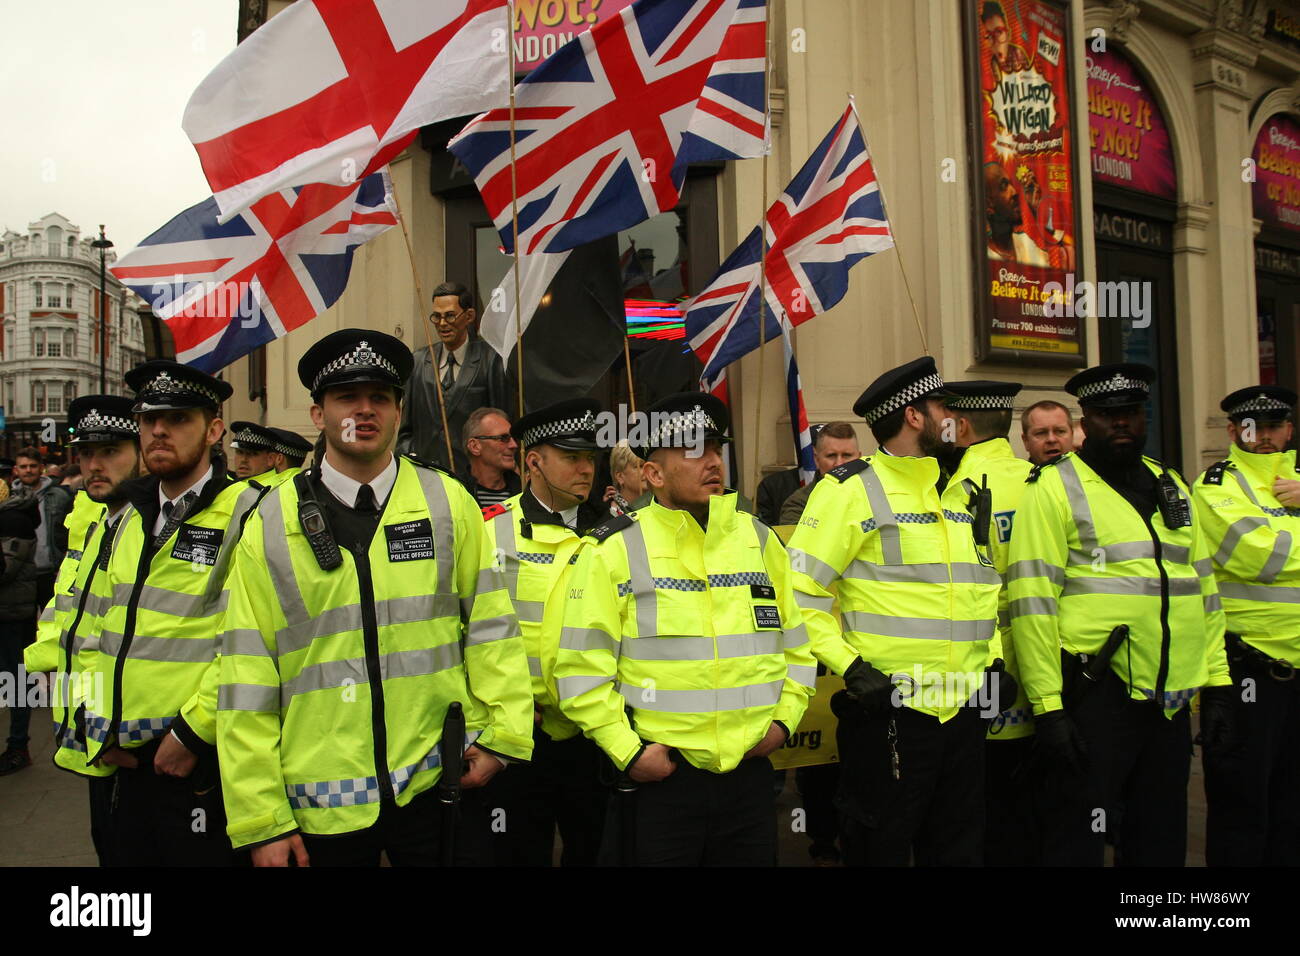 London, UK, 18th March 2017. Police surround a small group of far-right protests as campaign group Stand Up to Racism holds a march through central London to mark UN anti-racism day. Roland Ravenhill/ Alamy Live News Stock Photo